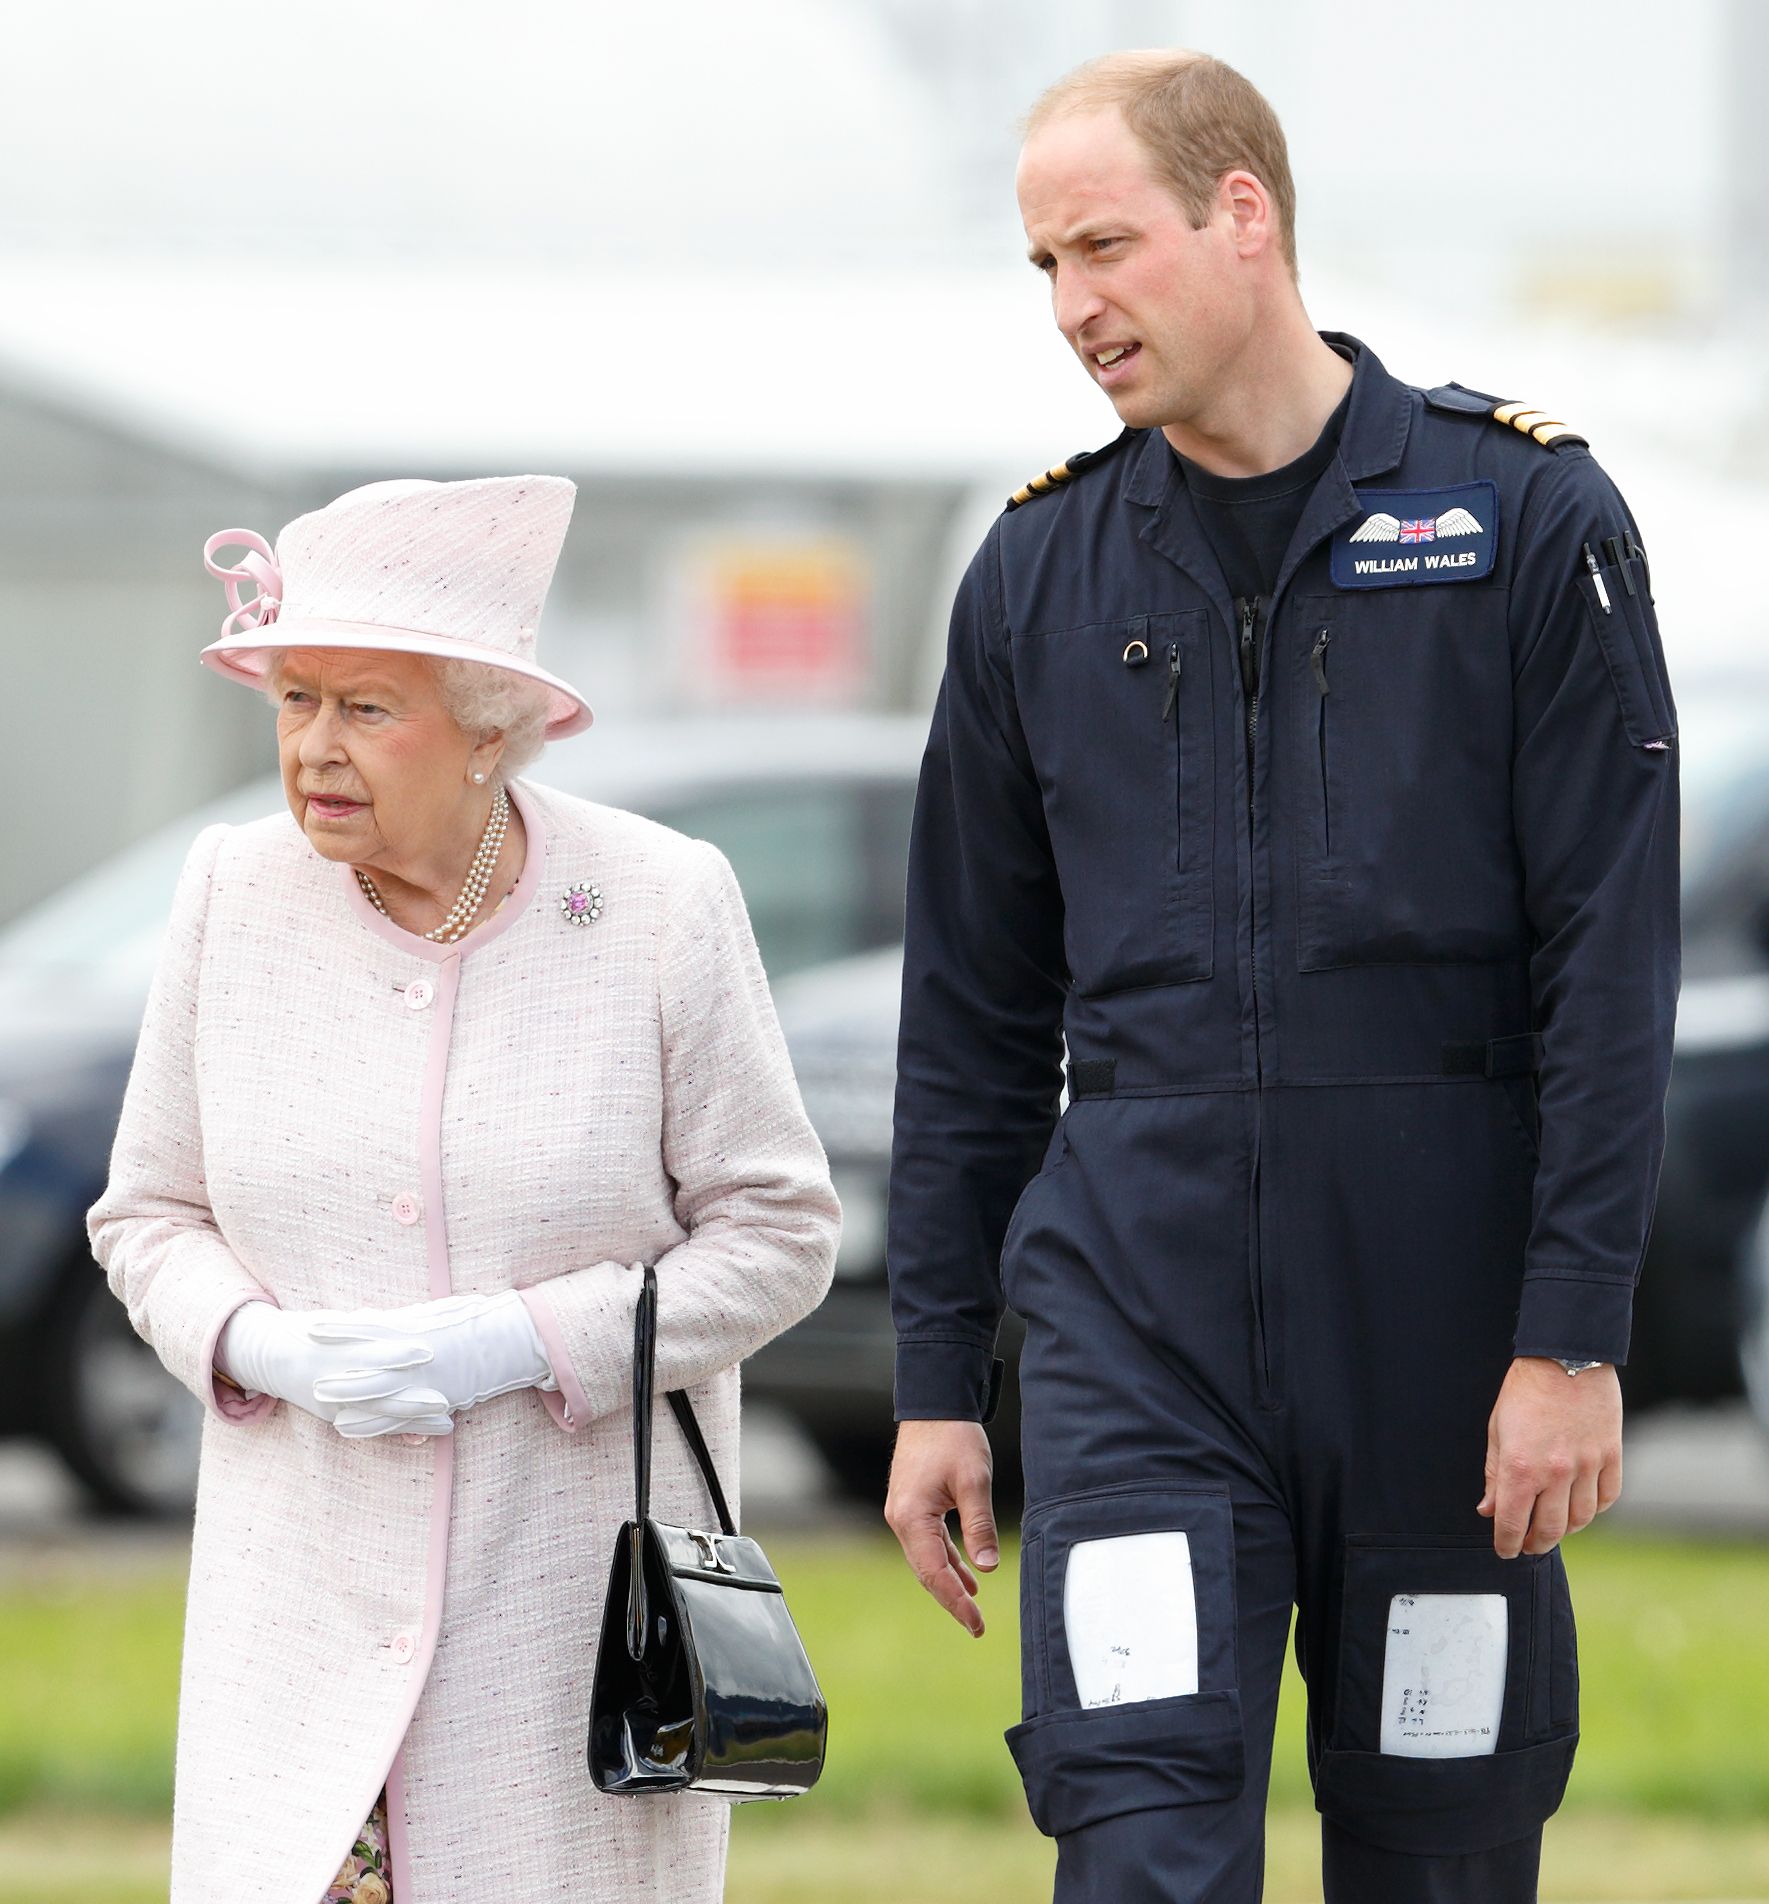 Prince William and Queen Elizabeth II take a tour of the new East Anglian Air Ambulance base at Cambridge Airport on July 13, 2016 in England. | Photo: Getty Images.